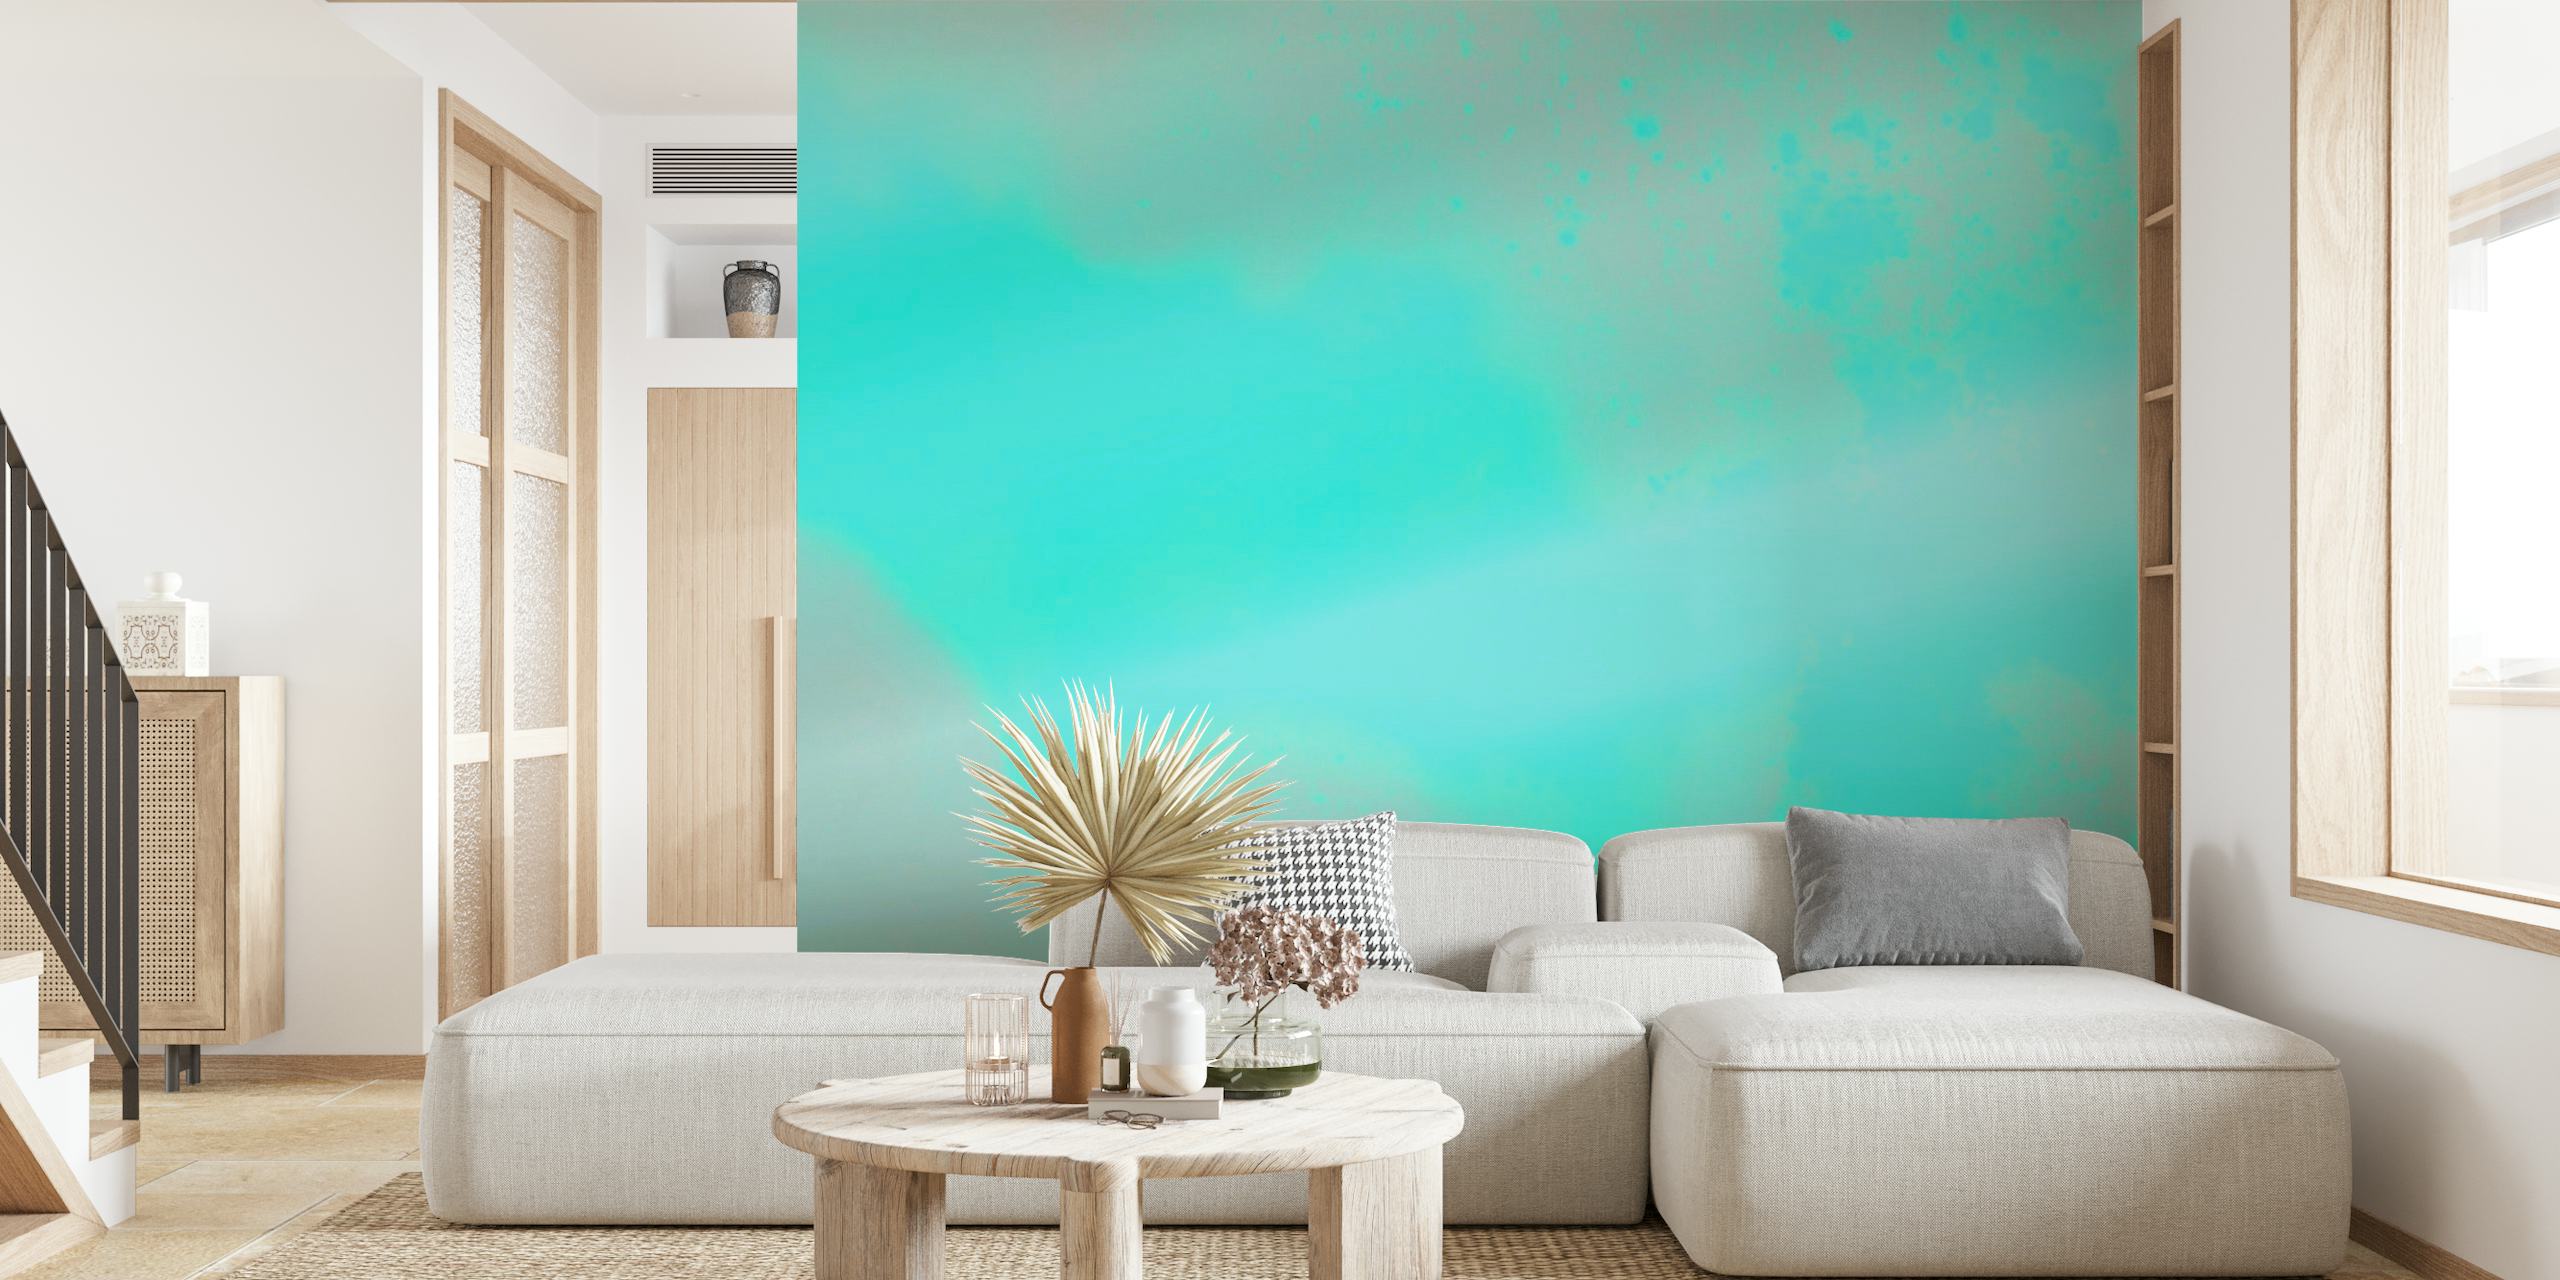 Abstract turquoise and green powder paint splash wall mural